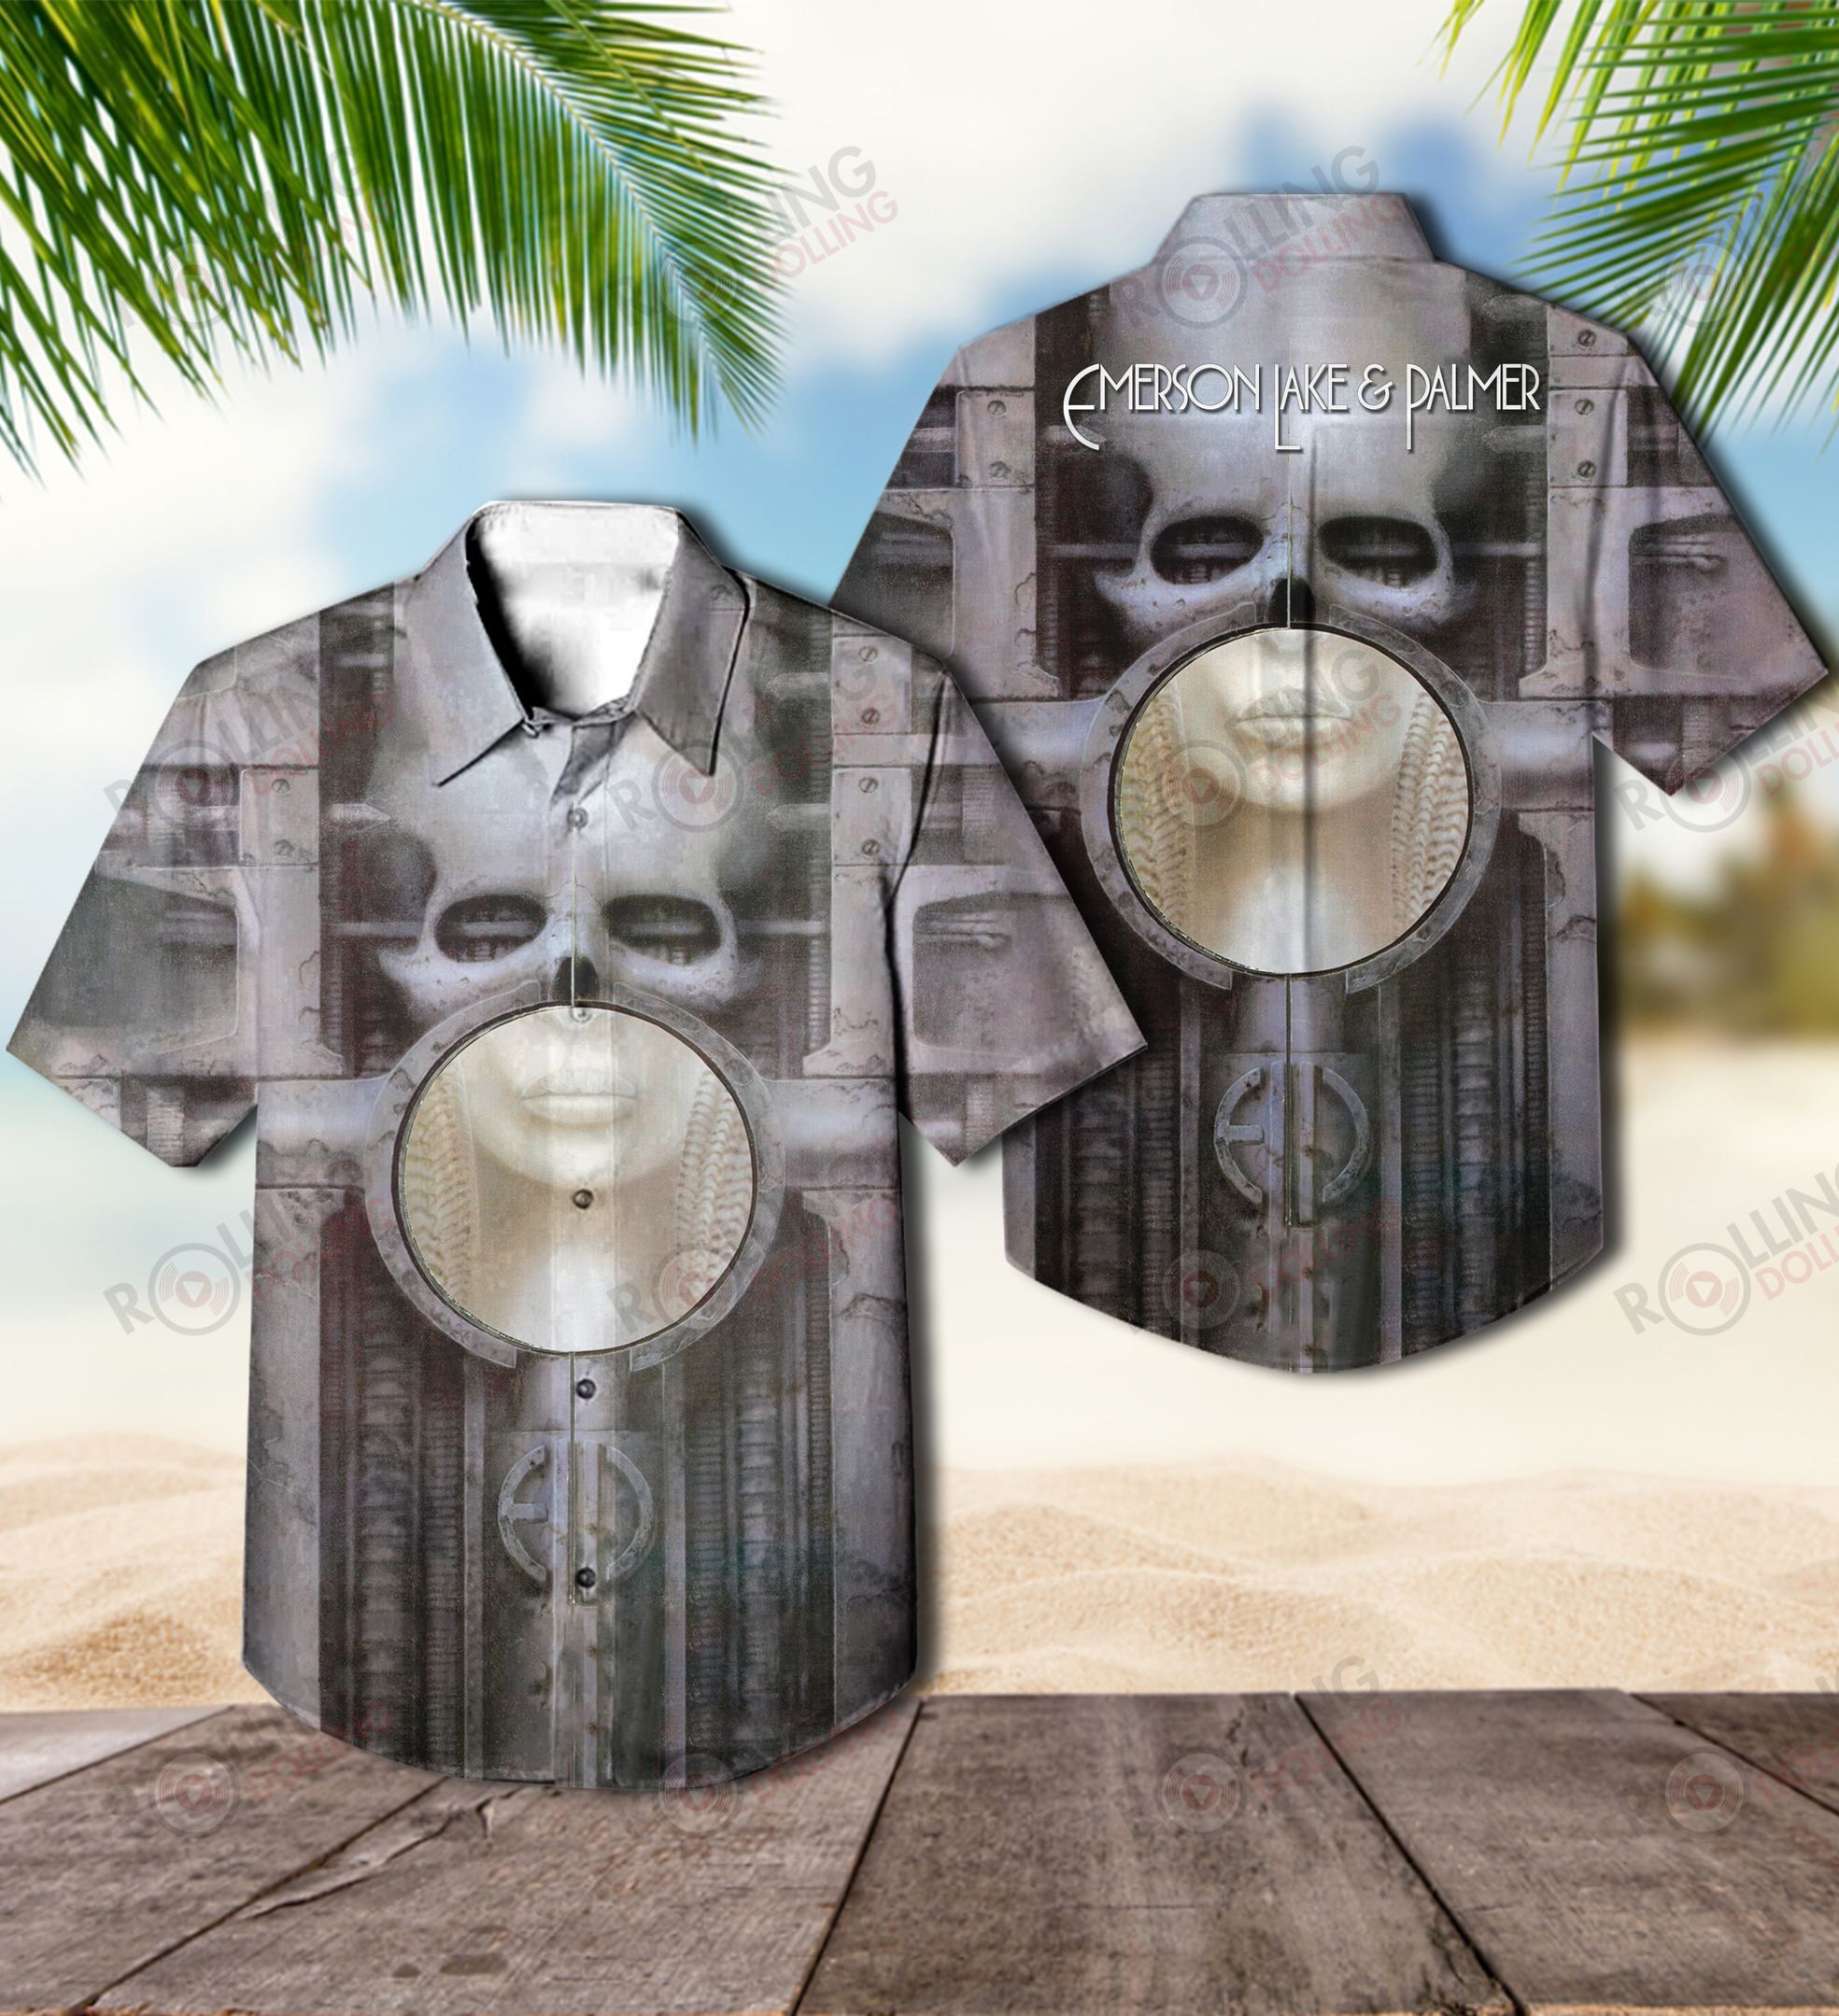 This would make a great gift for any fan who loves Hawaiian Shirt as well as Rock band 98